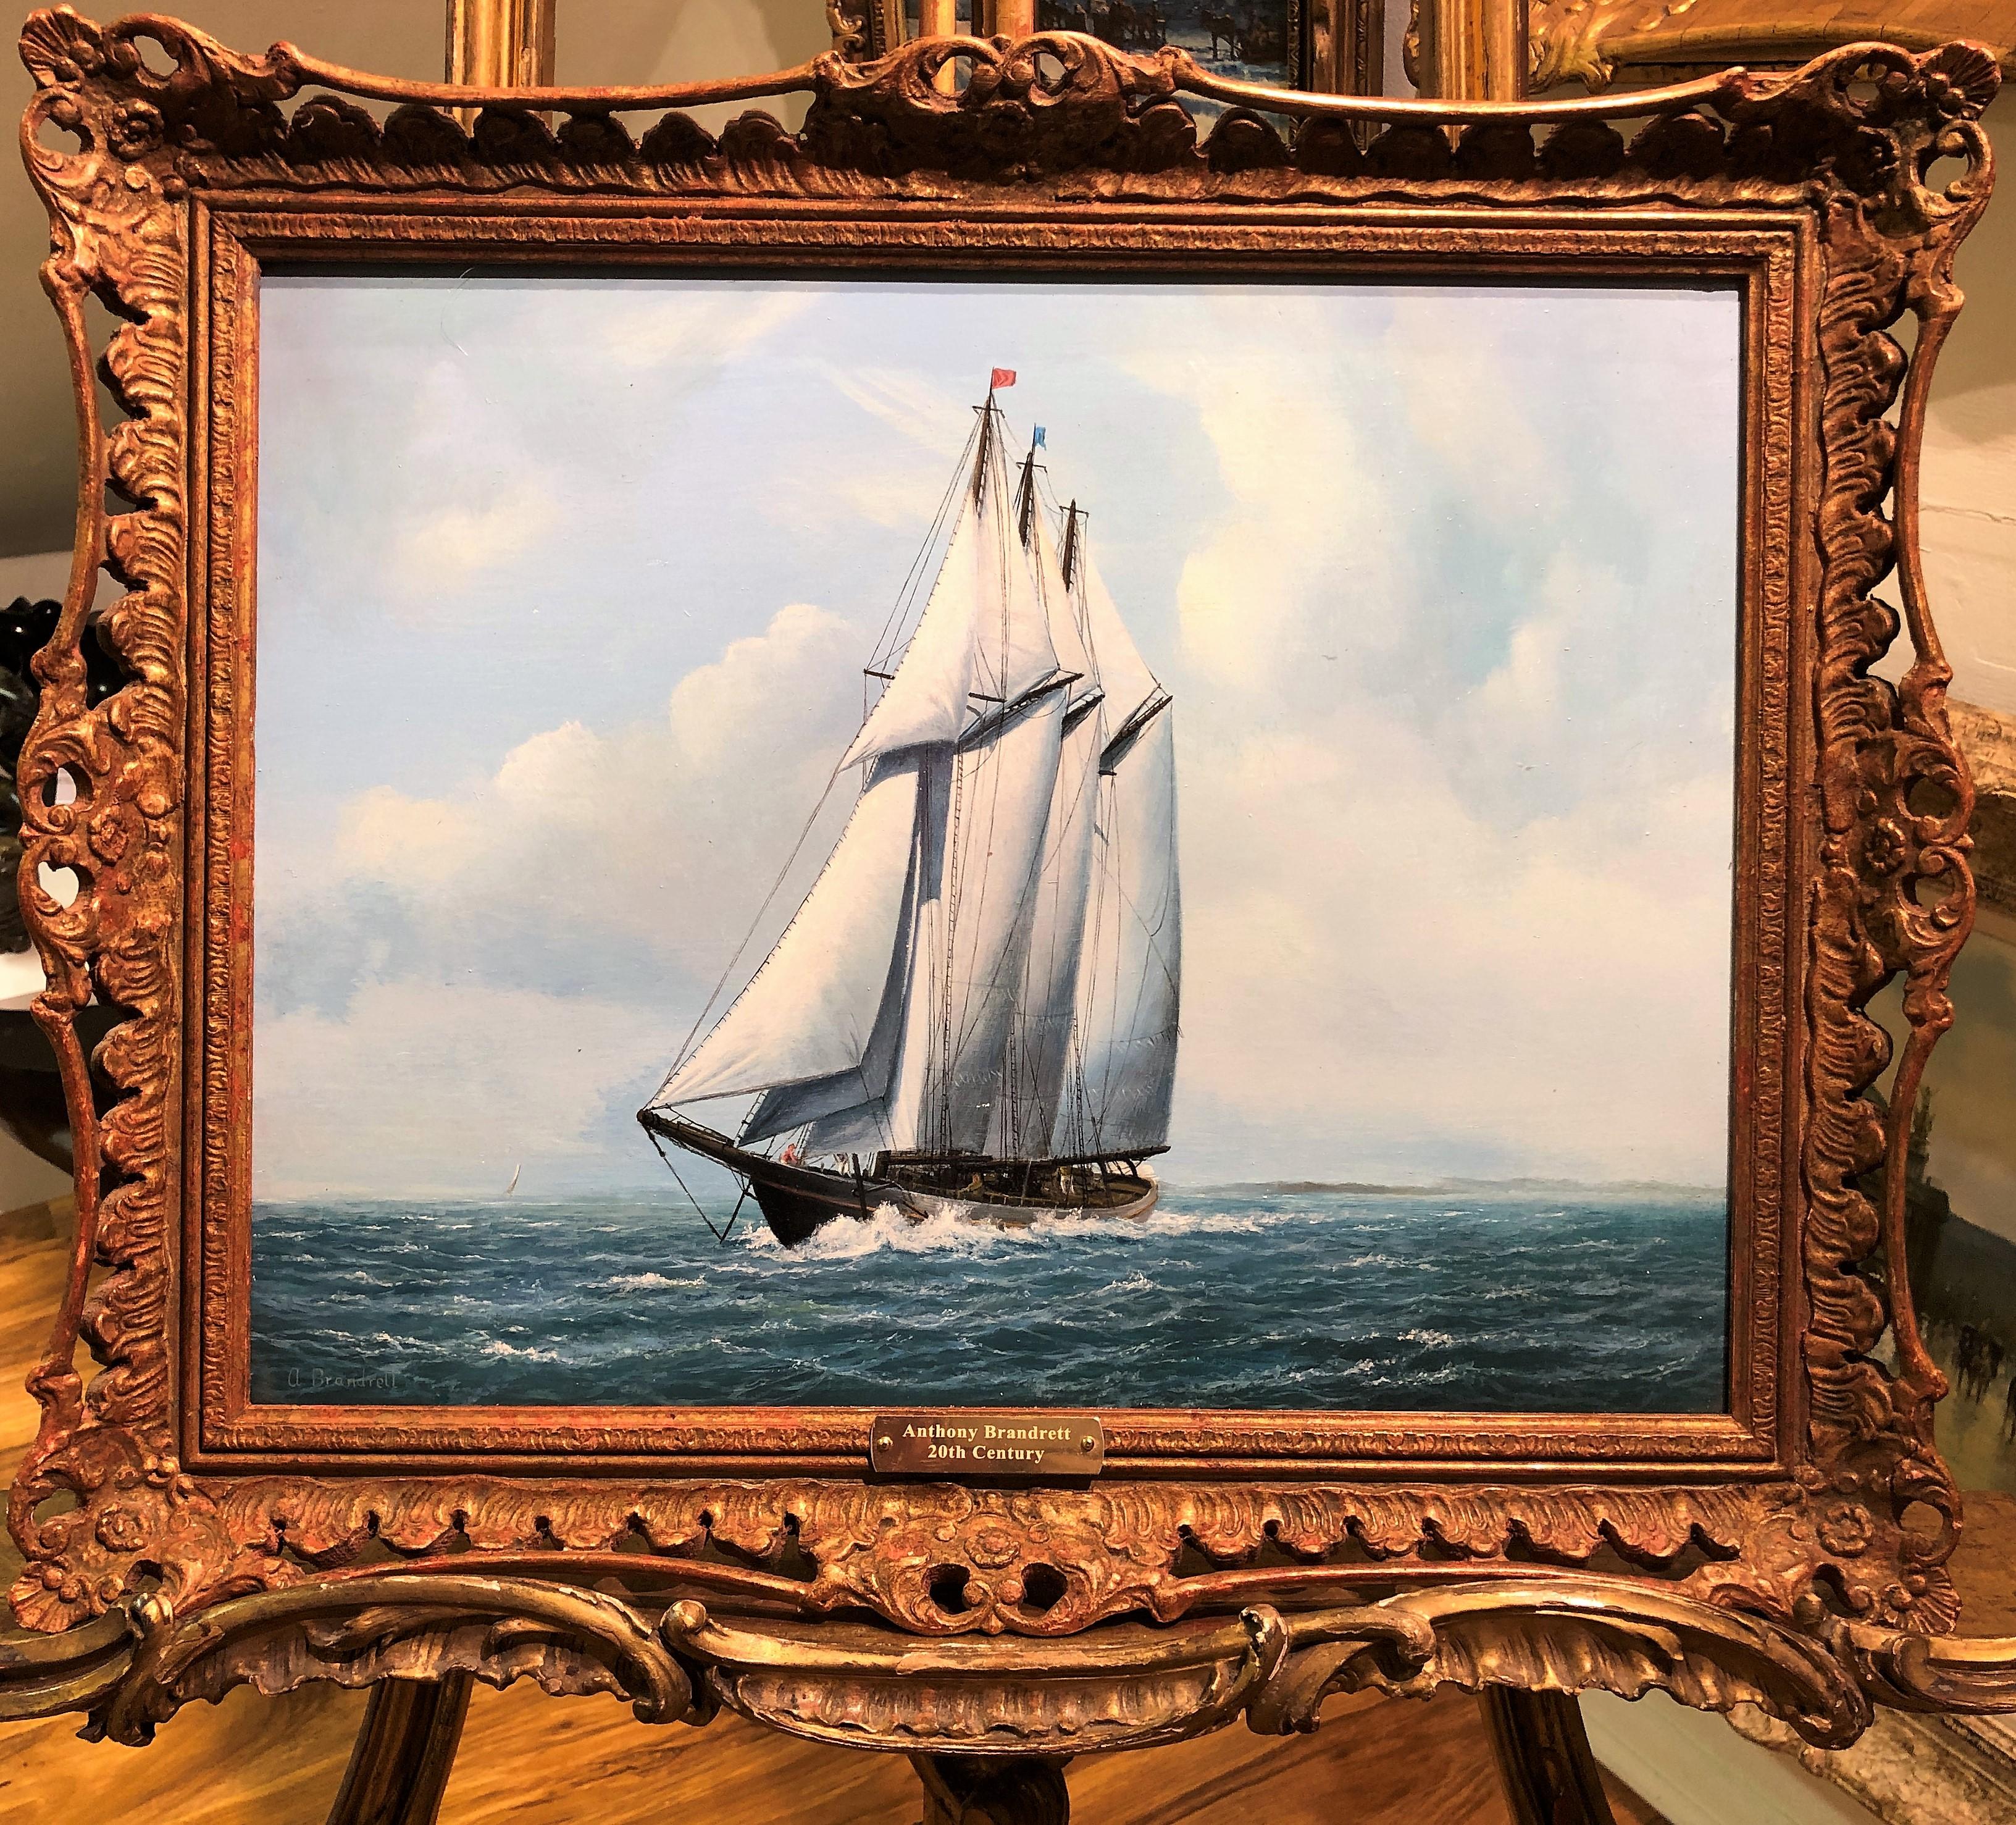 OIL PAINTING MARITIME SHIP MASTER PIECE 20th CENTURY

FINE RARE MARTINE PAINTING ORIGINAL

20th Century OLD MASTER STYLE OIL PAINTING GOLD GILT FRAME

By Similar $5,000 Premier Collection

NEW COLLECTION Of RARE PIECES OF OLD HISTORY

Good condition